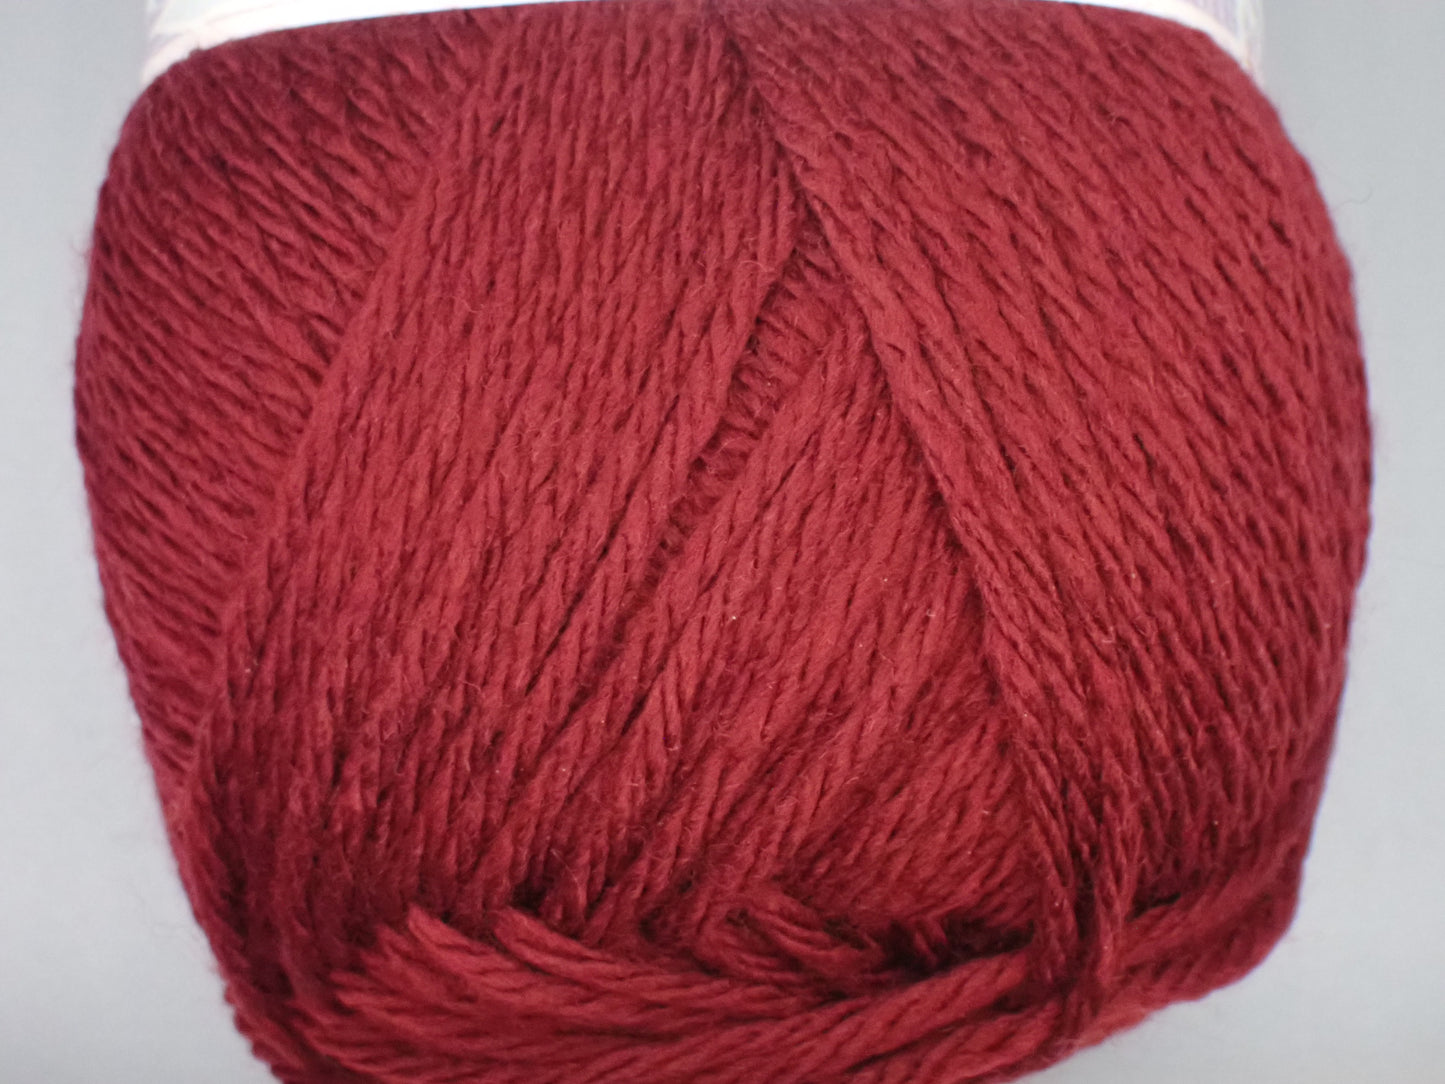 Cascade Yarns Pacific worsted weight Bordeaux